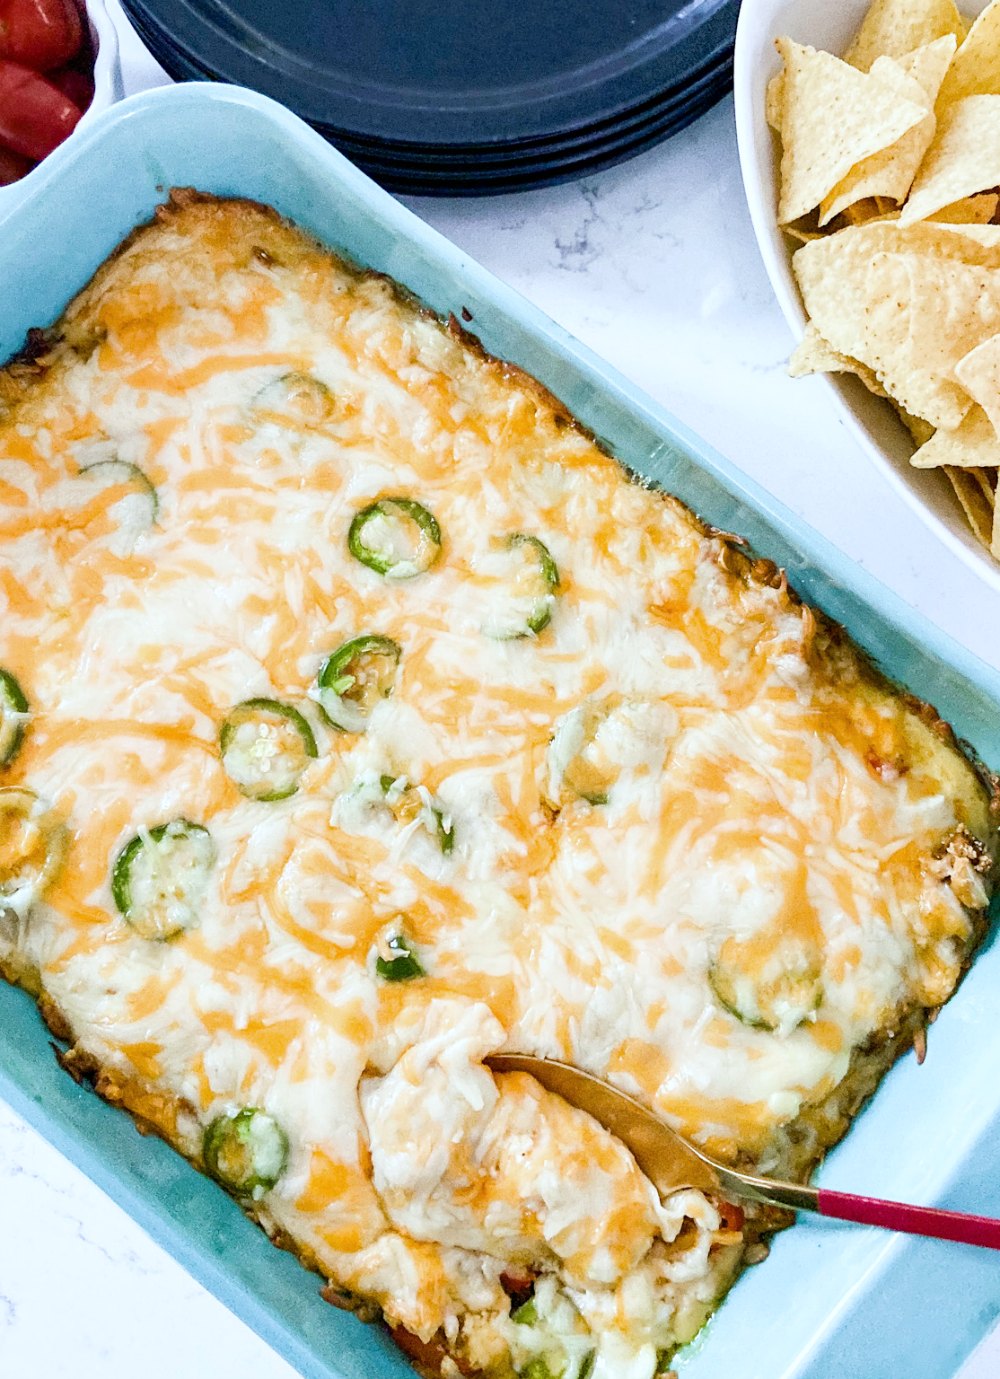 Low Carb Cheesy Taco Bake - Keto. A cheesy keto taco casserole that is the perfect topping over salads for you and over chips for your kids! All of the taste of tacos with a fractions of the carbs! 